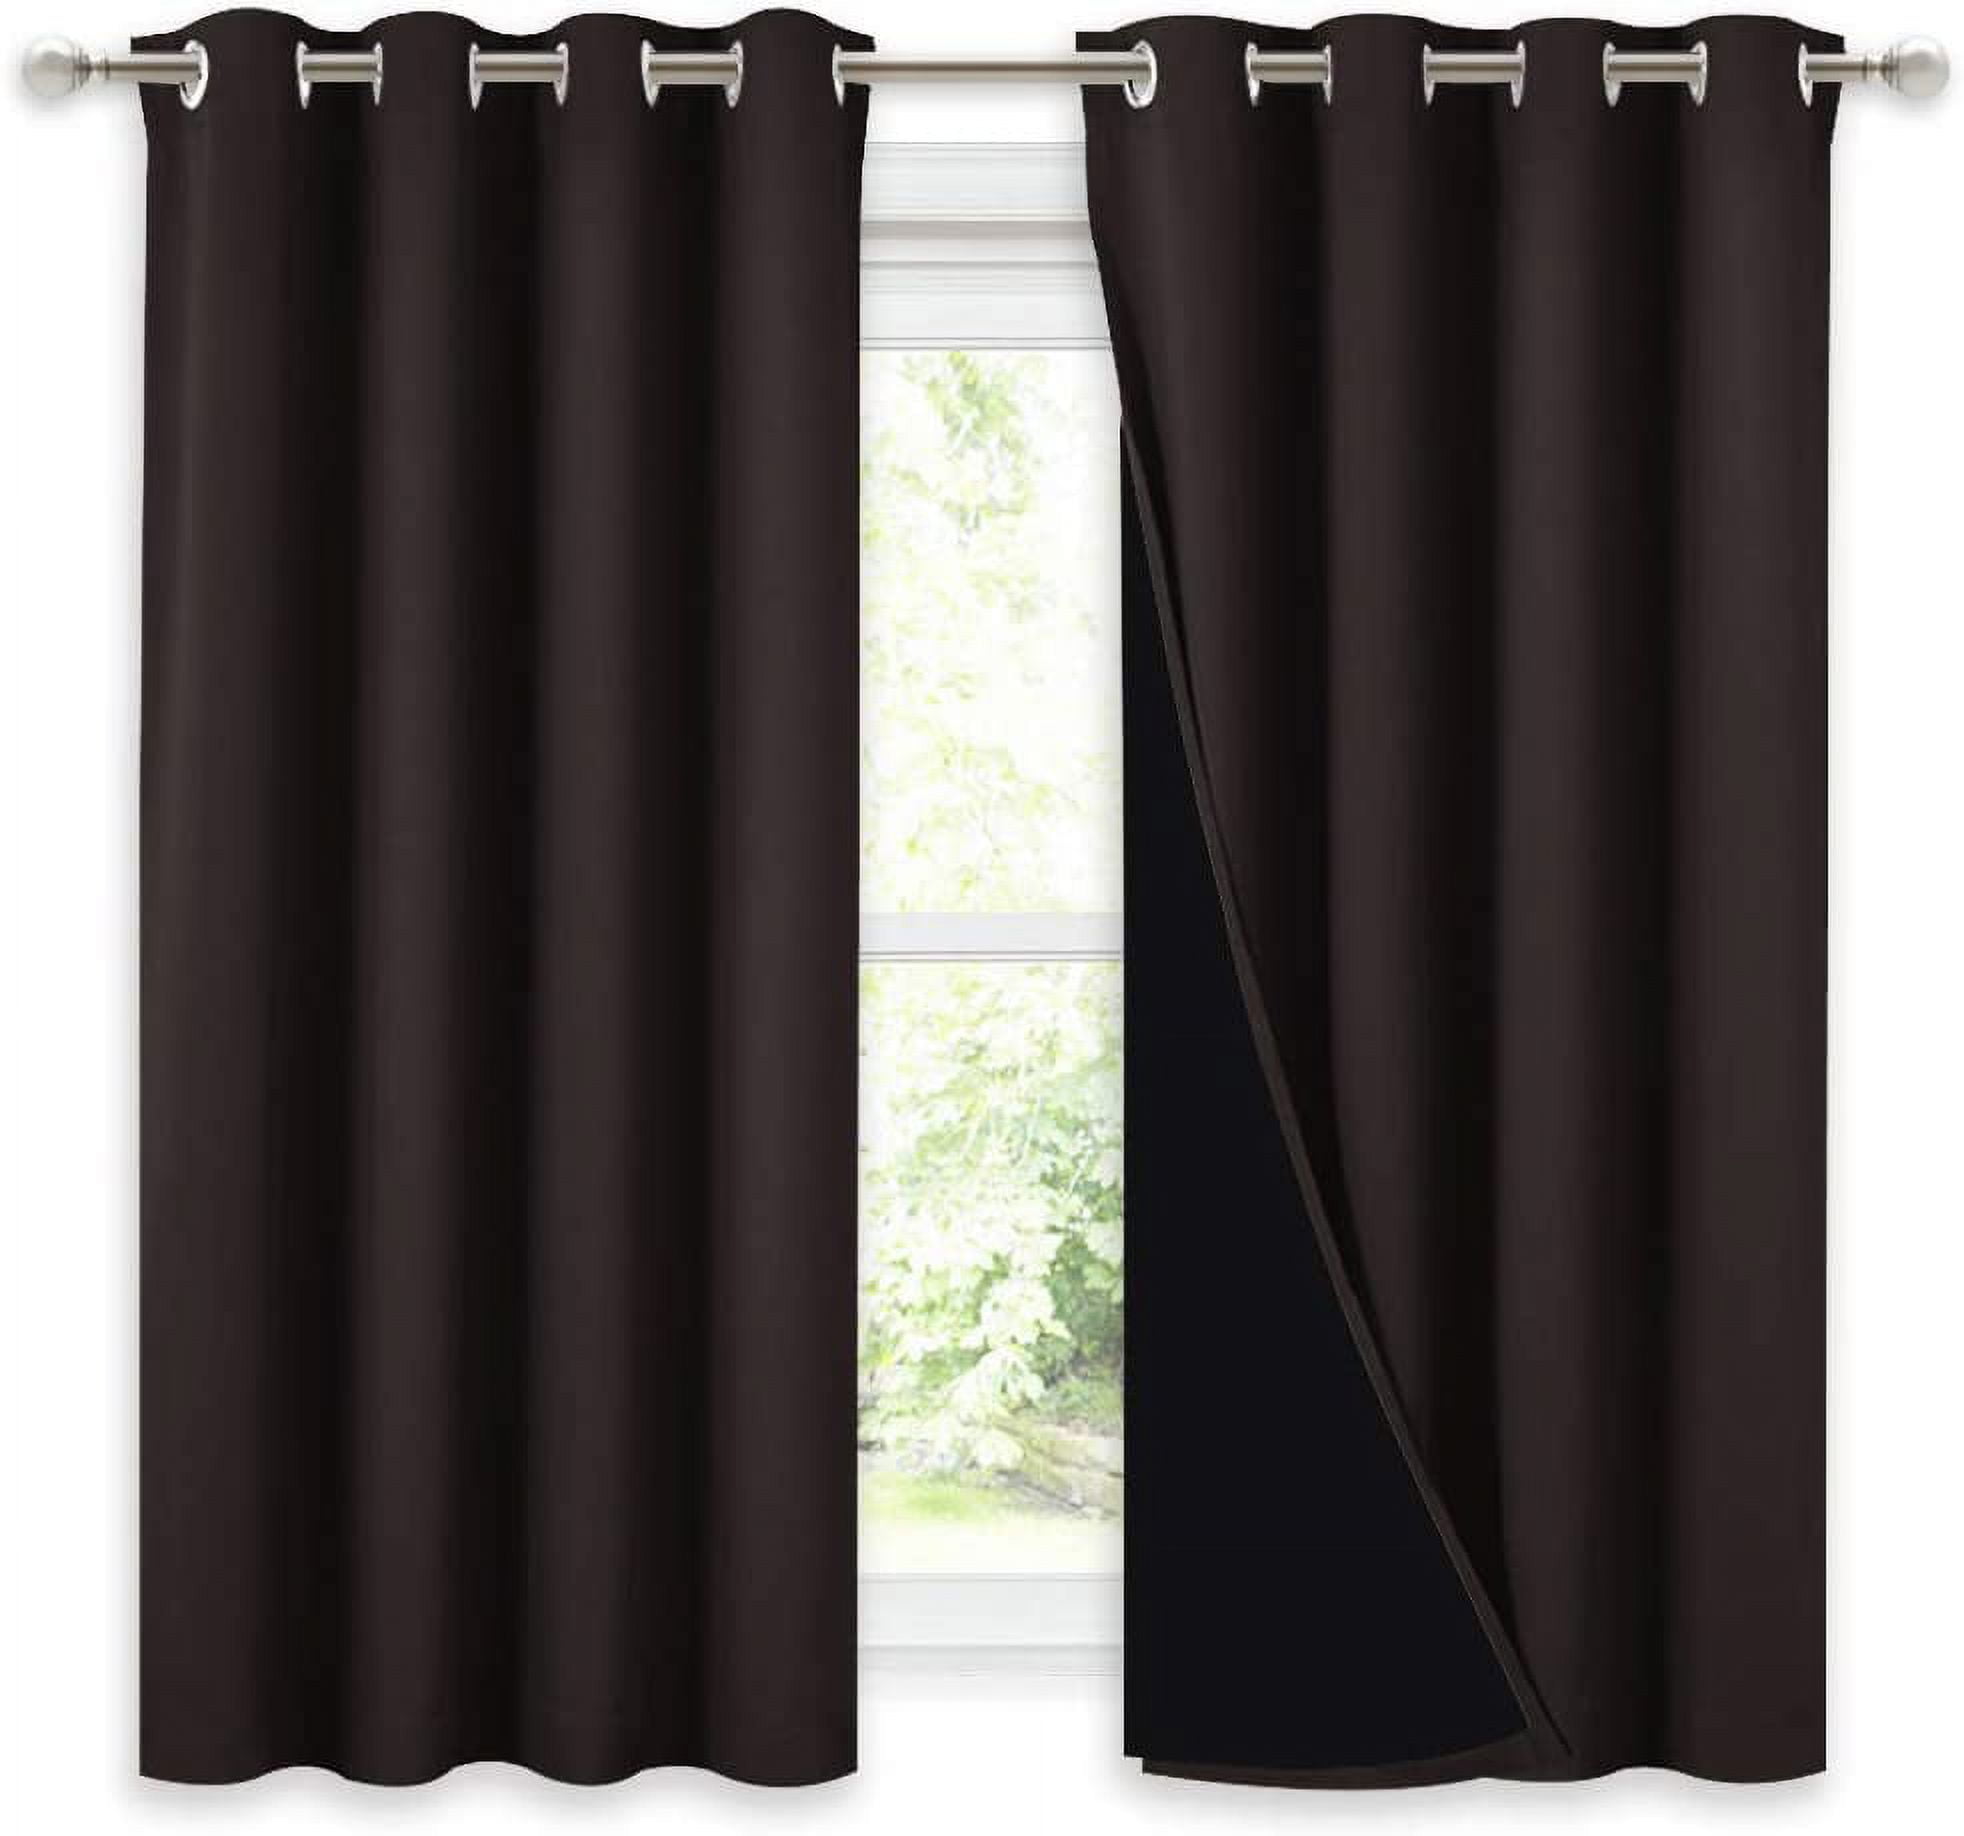 NICETOWN Truly Blackout Curtains 54 inches Length, 2 Thick Layers